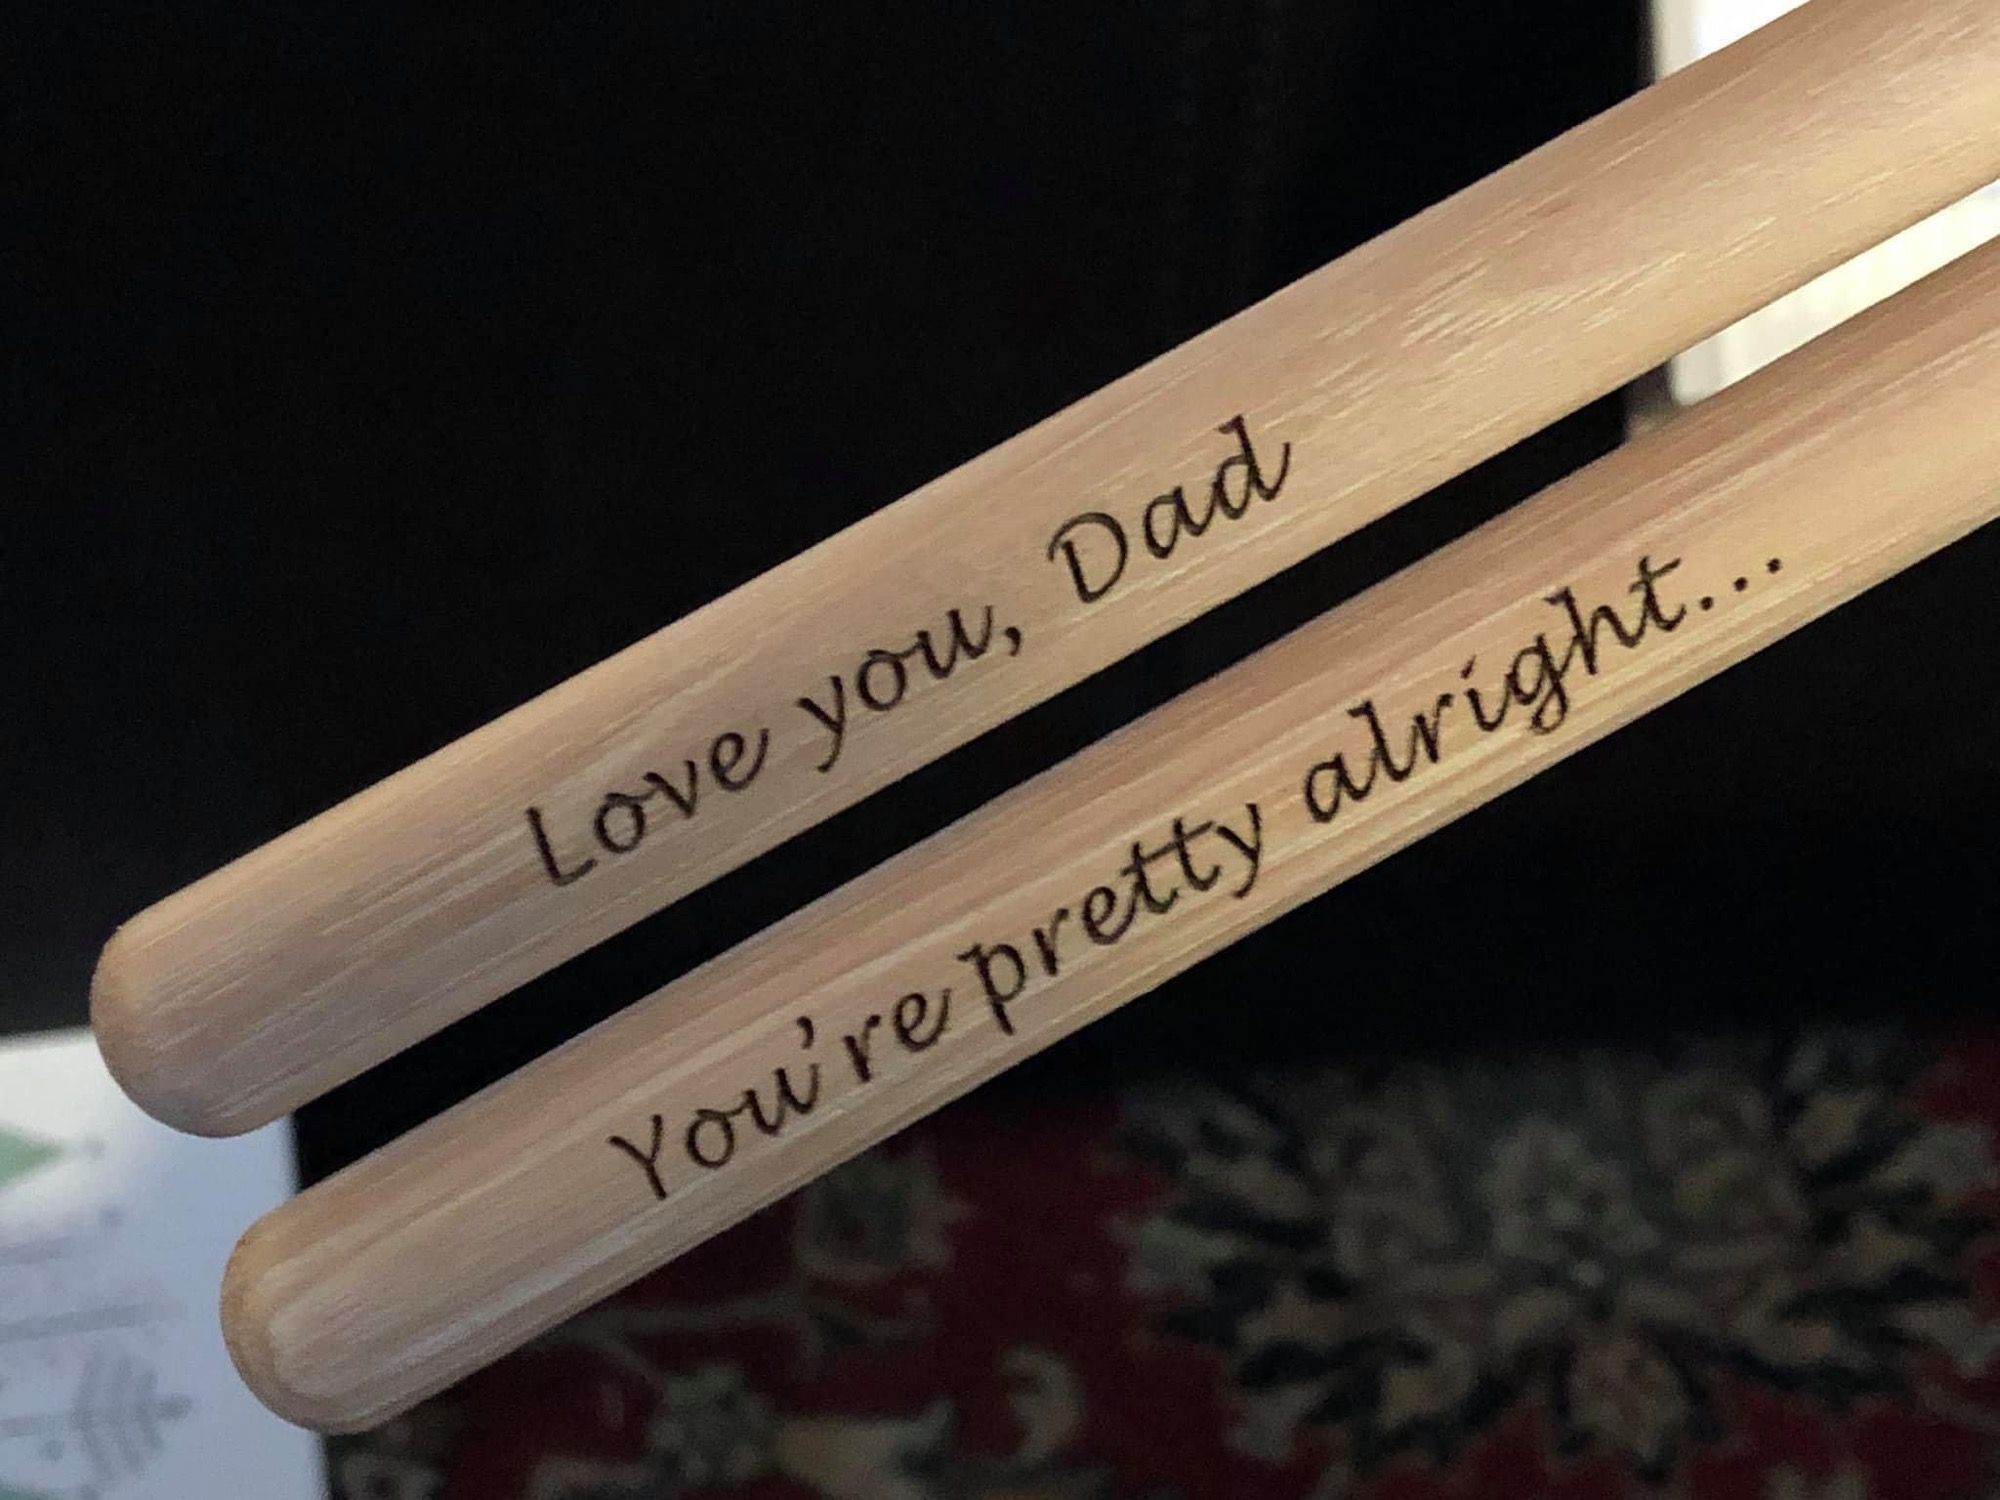 Received some custom engraved drumsticks from my kids for Christmas